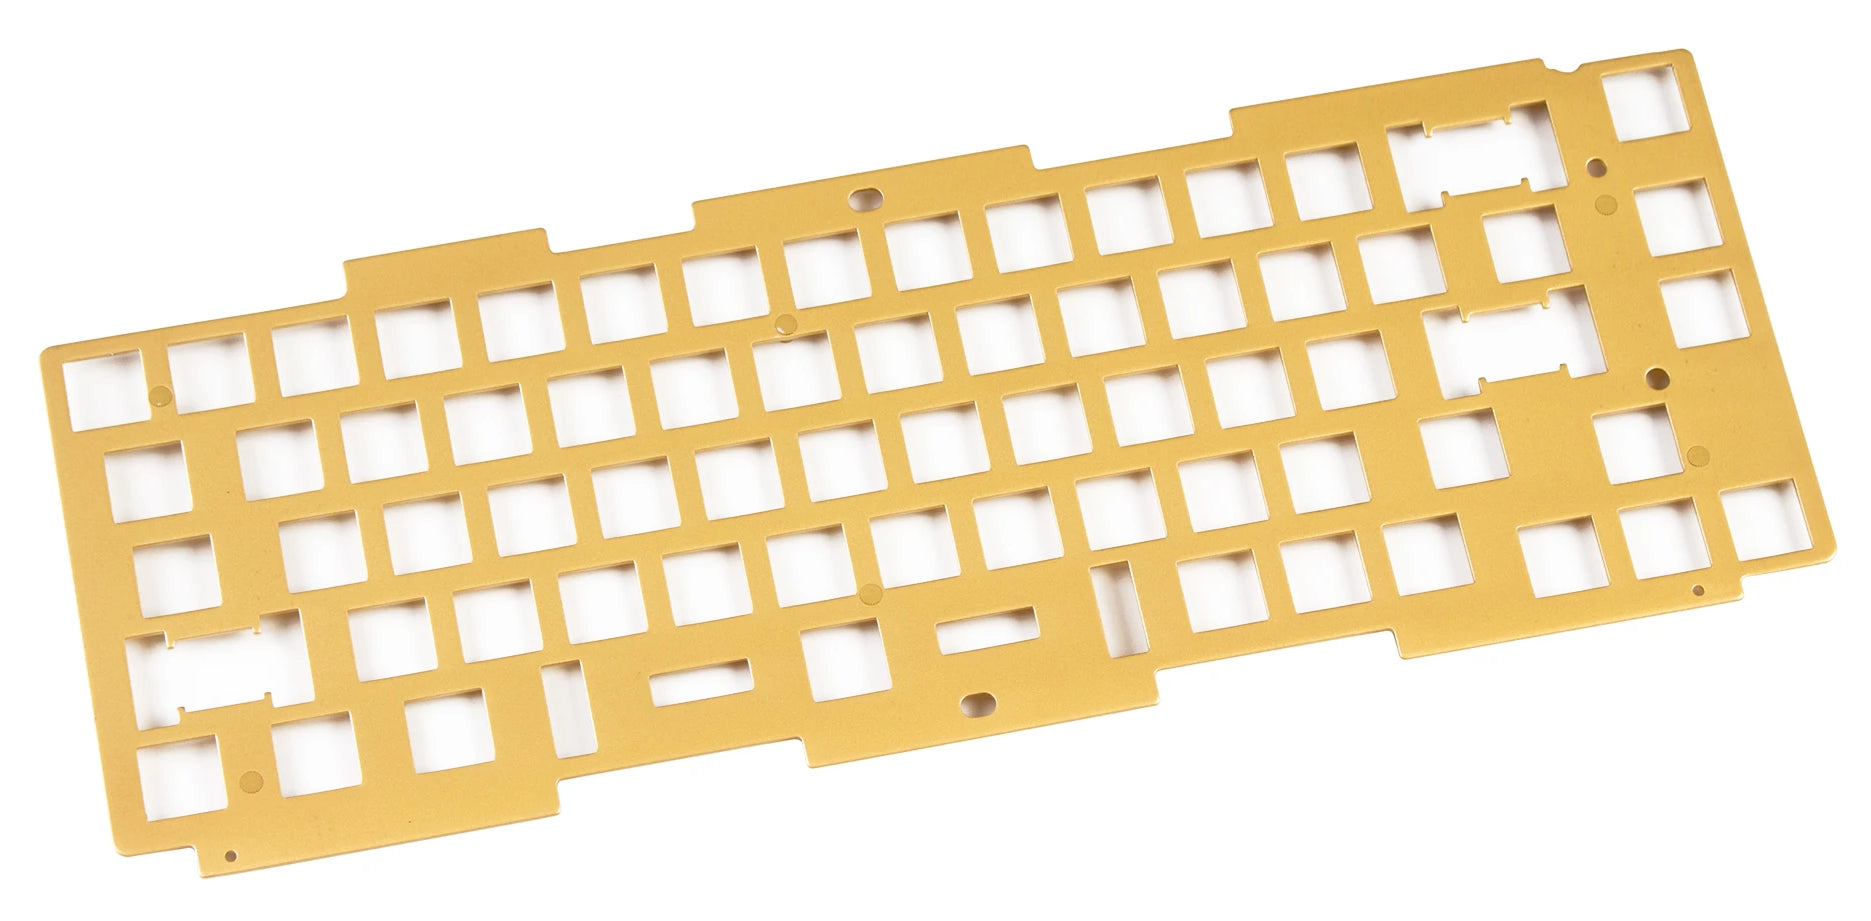 Q2 Brass Plate – Keychron | Mechanical Keyboards for Mac, Windows and ...